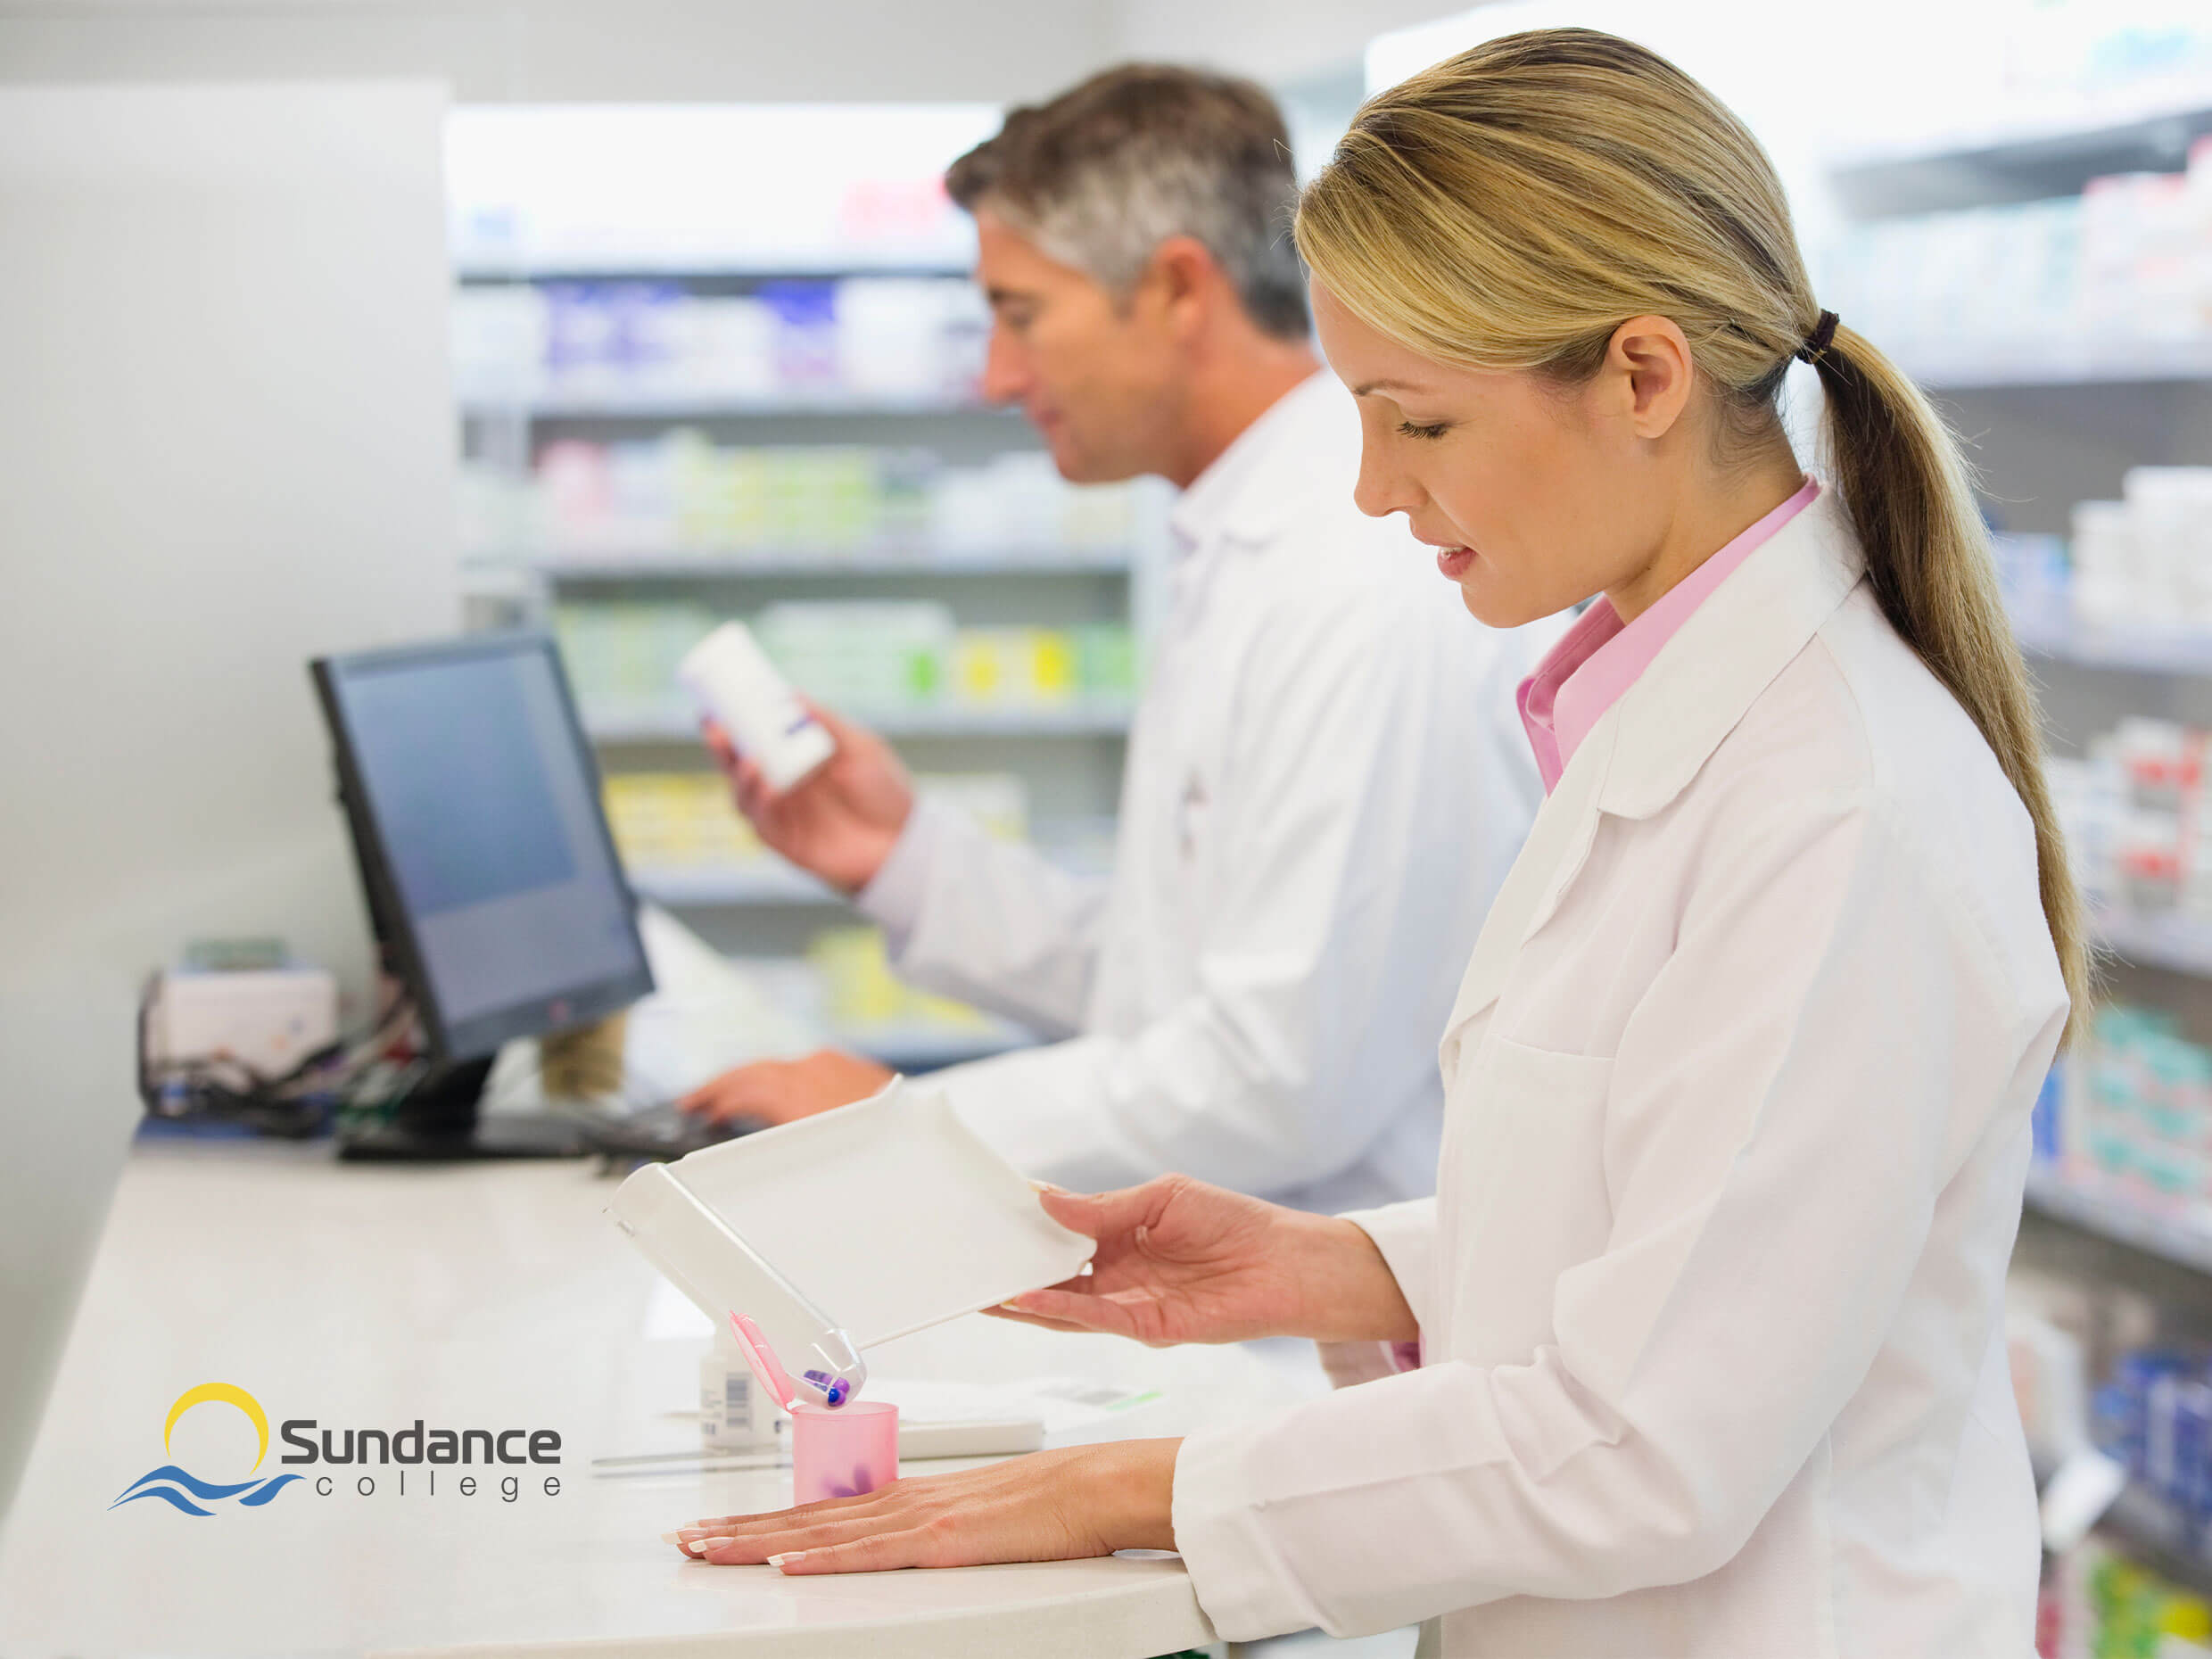 Pharmacy Assistant checking labels and inventory while a Pharmacy Technician refills a bottle in a retail pharmacy